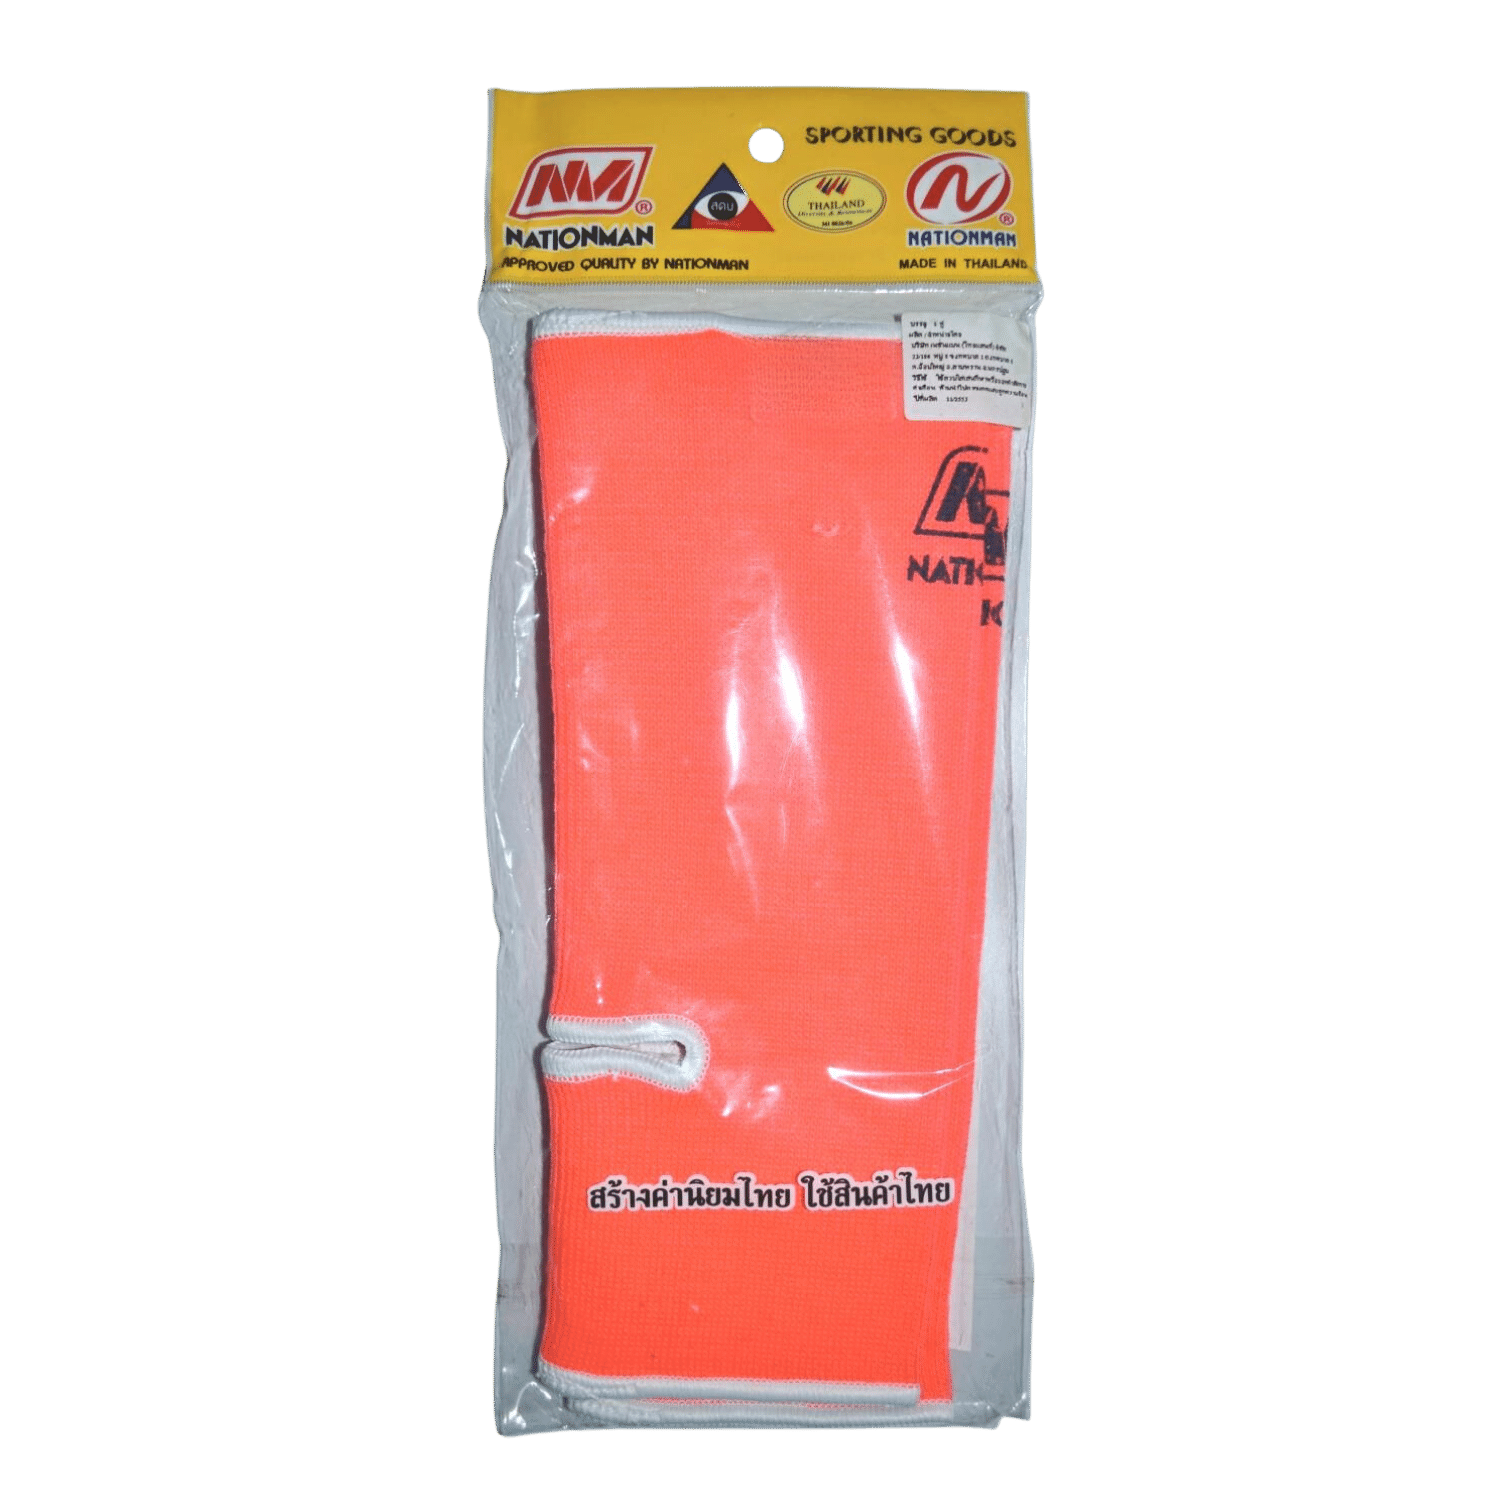 A package of Nationman Anklets - Orange safety gloves for comfort during Muay Thai training.